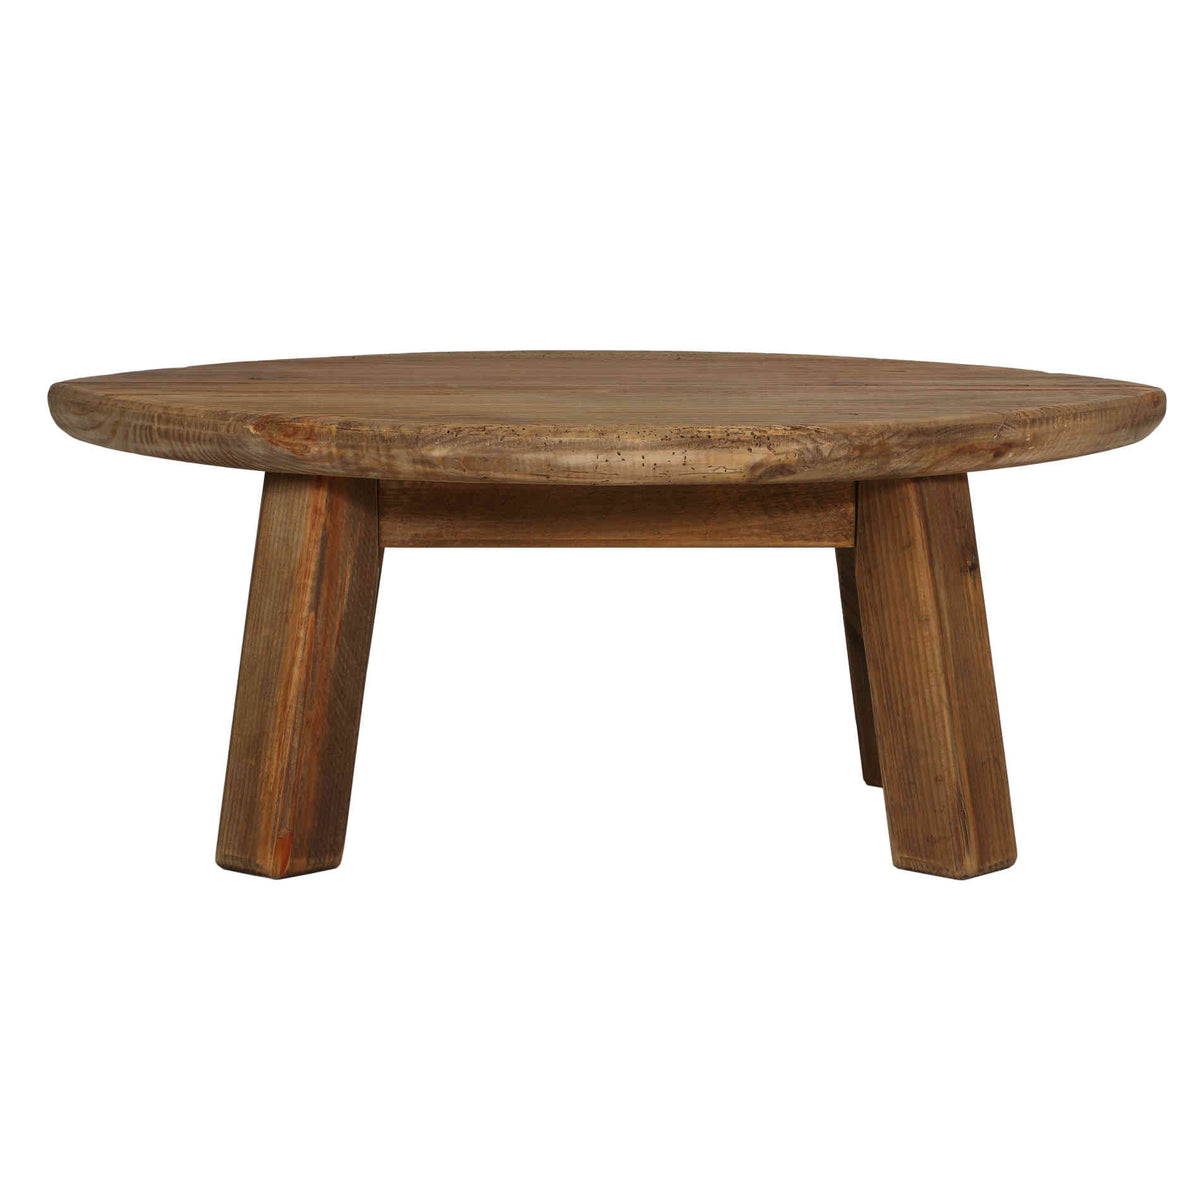 Bare Decor Wilder Oval Coffee Table, Solid Reclaimed Wood, Small 22x19x11